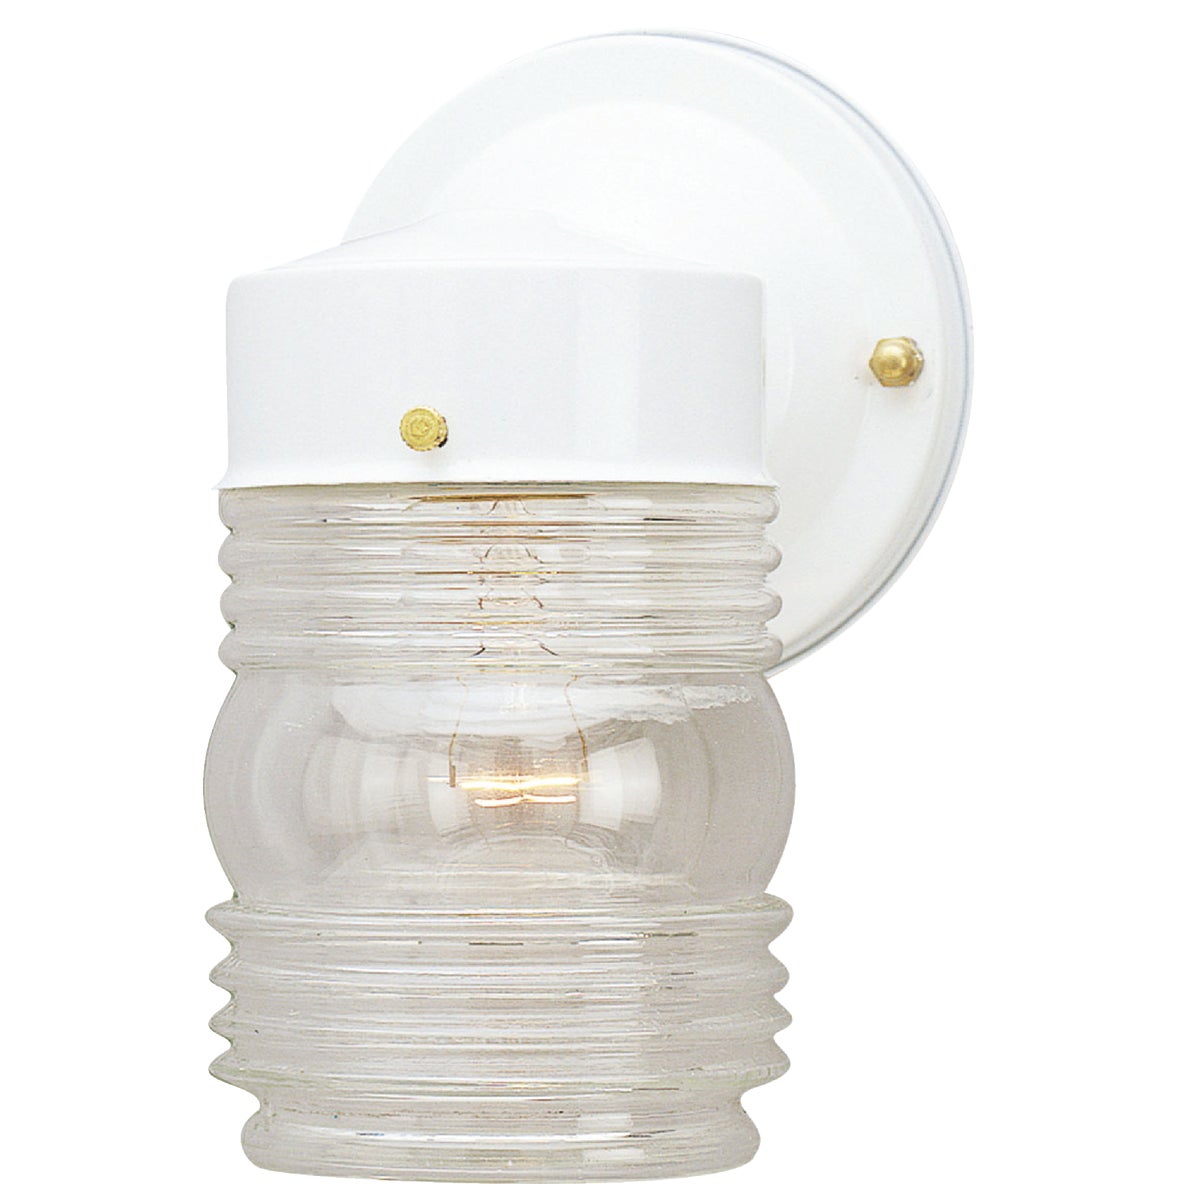 Home Impressions White Incandescent Type A Outdoor Wall Light Fixture